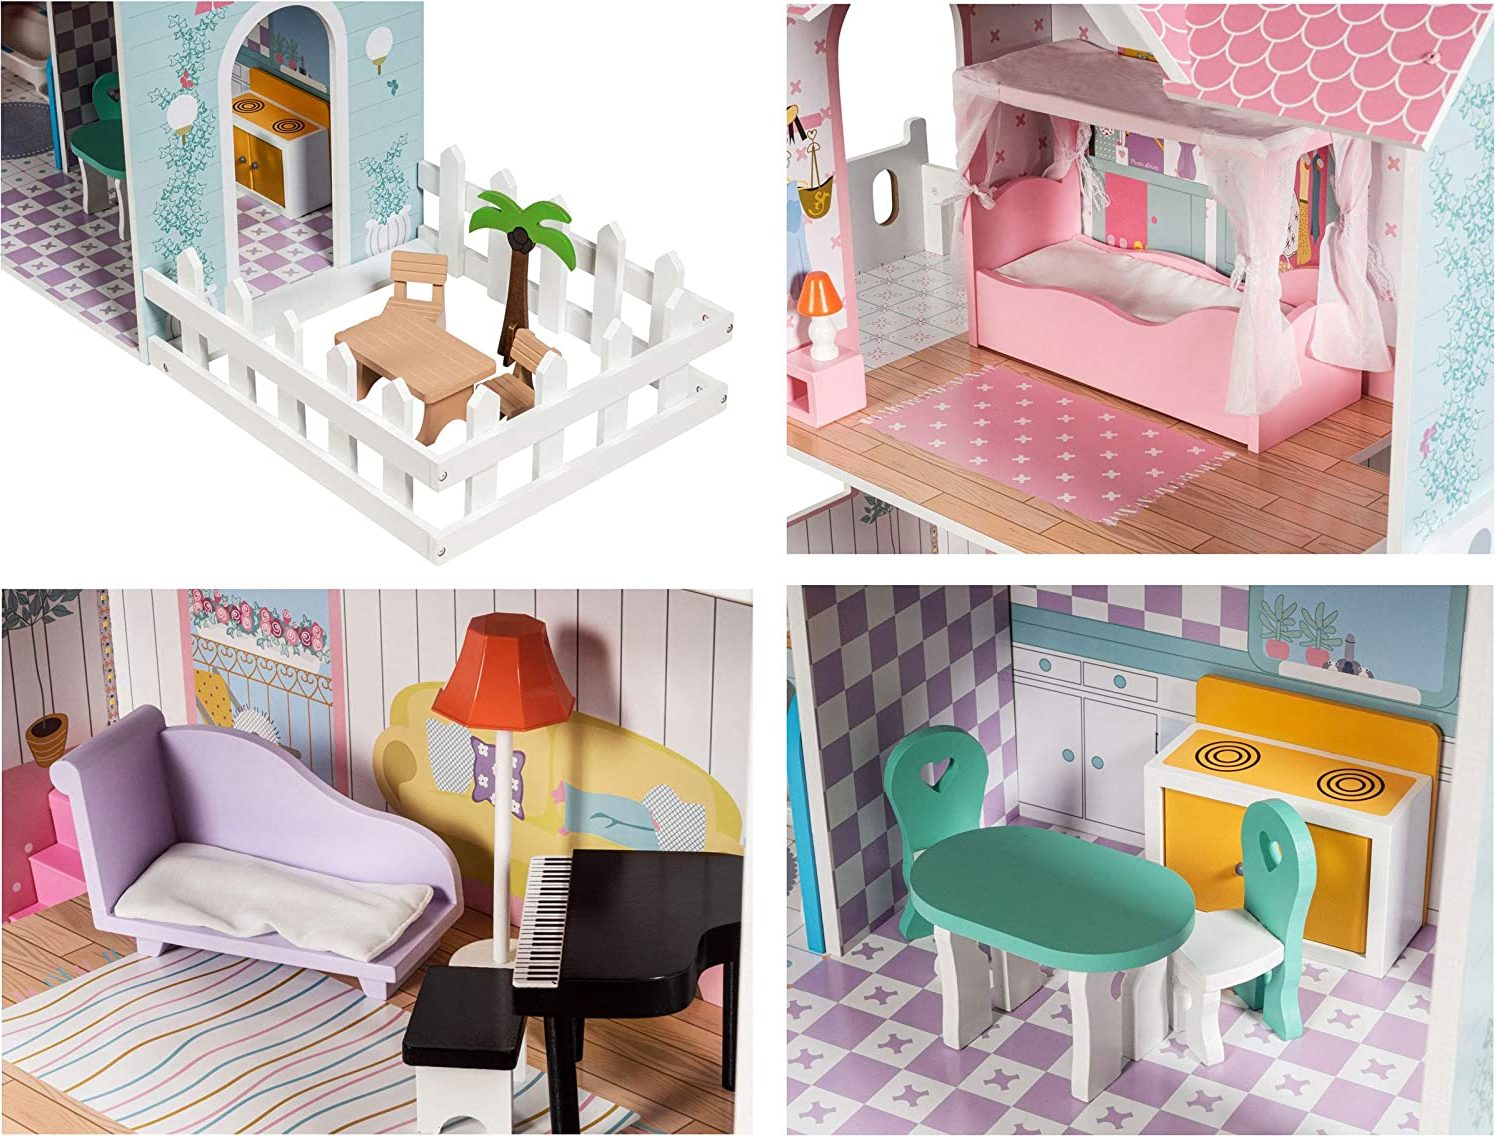 Doll House Play Set Toy | wooden doll house